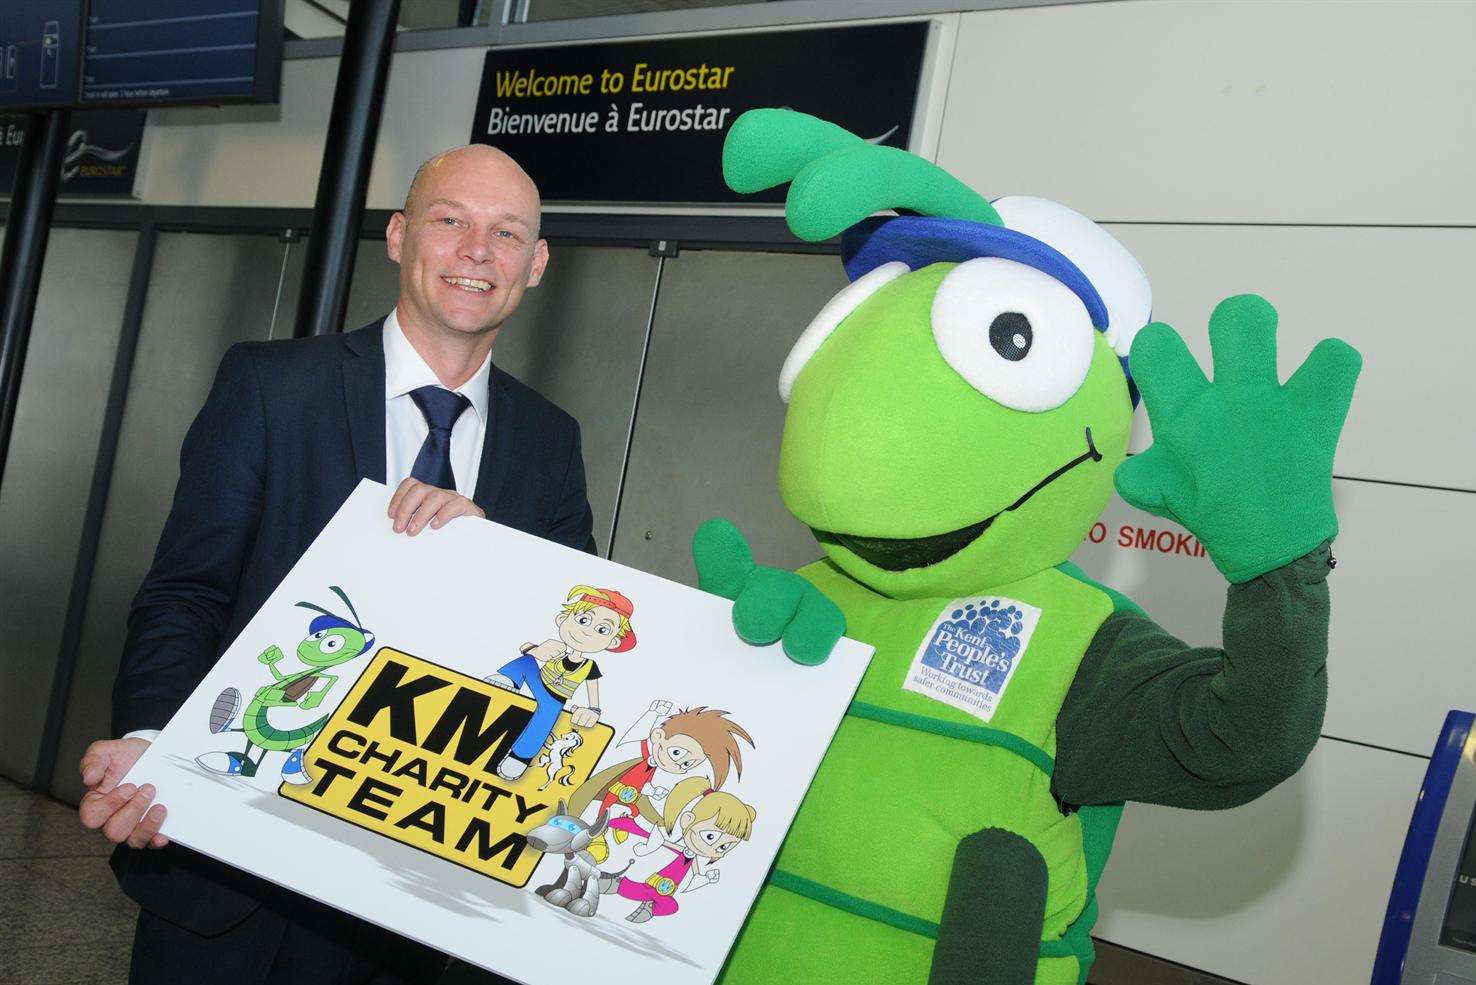 Eurostar's head of environment and energy, Luke Ervine, celebrates the company's support of KM Walk to School 2015 with the scheme's mascot Buster Bug